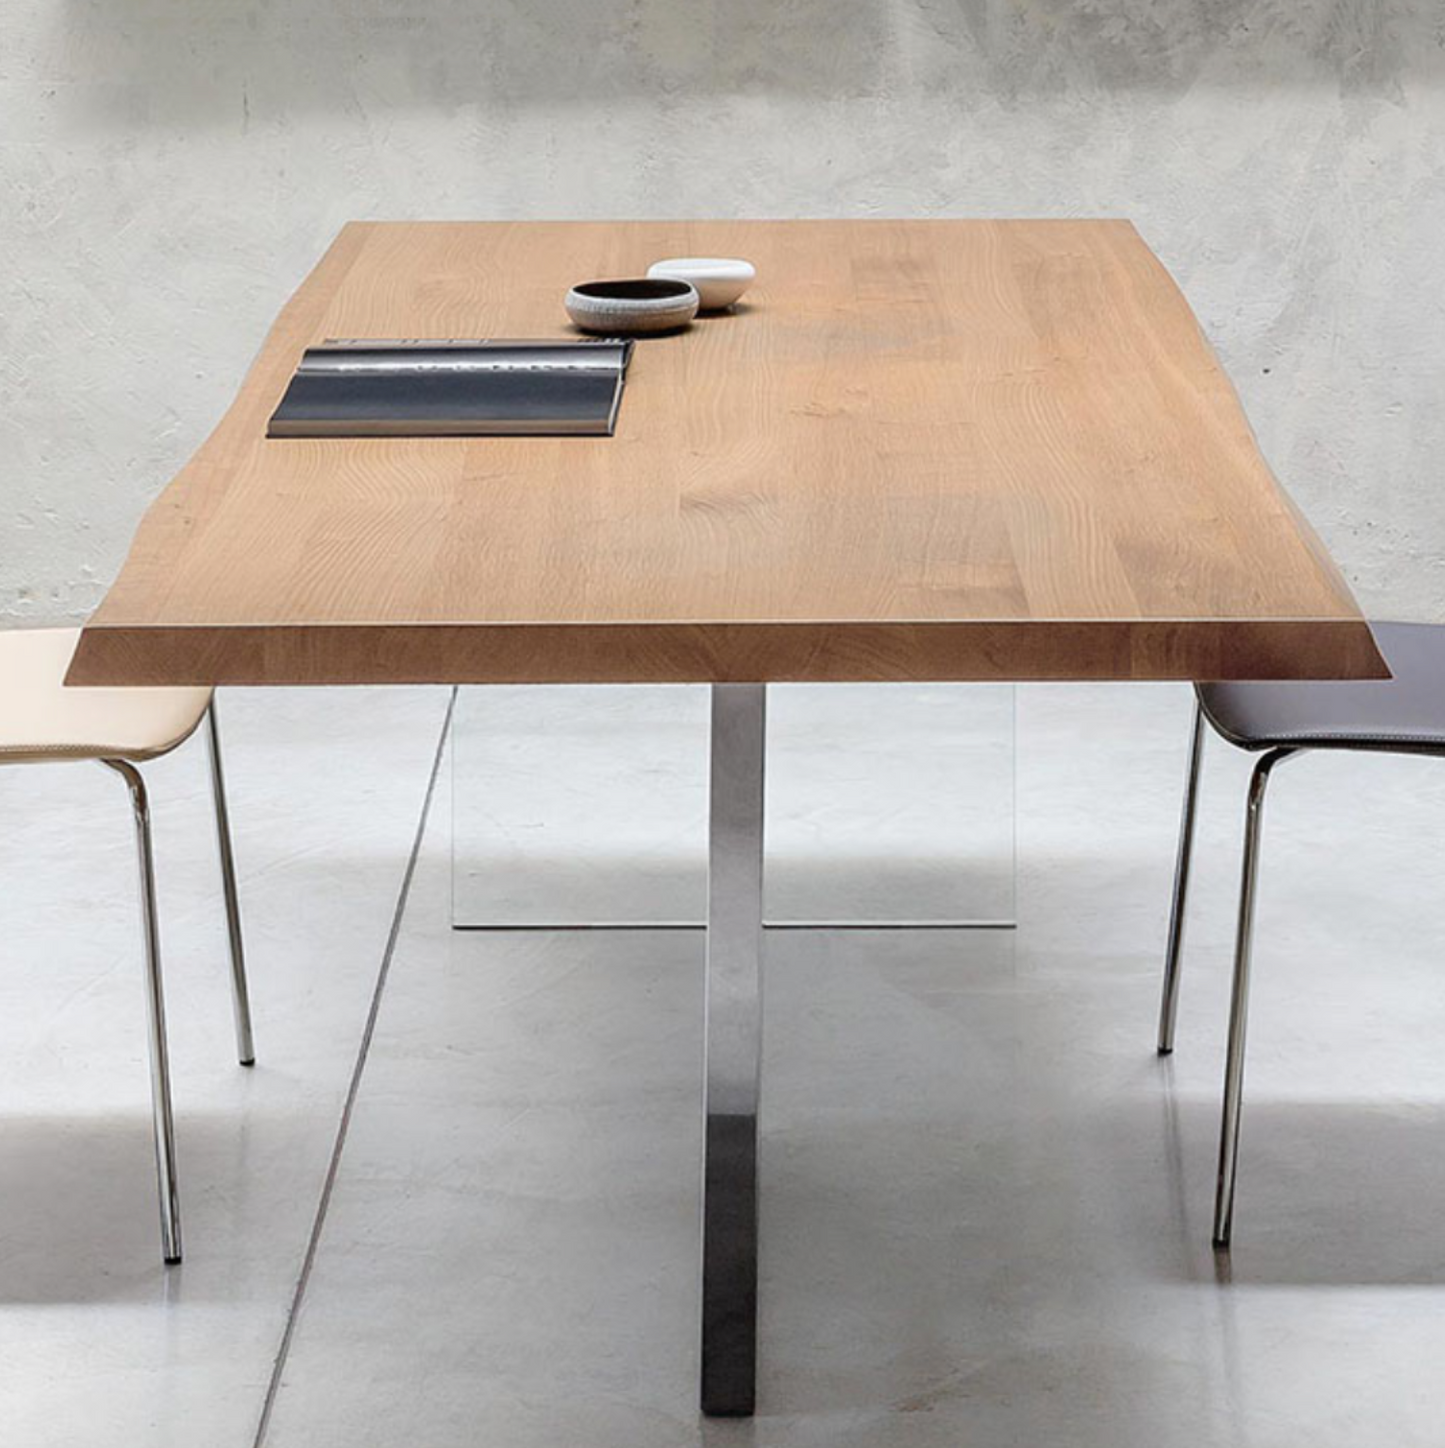 Cubric Table by Riflessi Lab